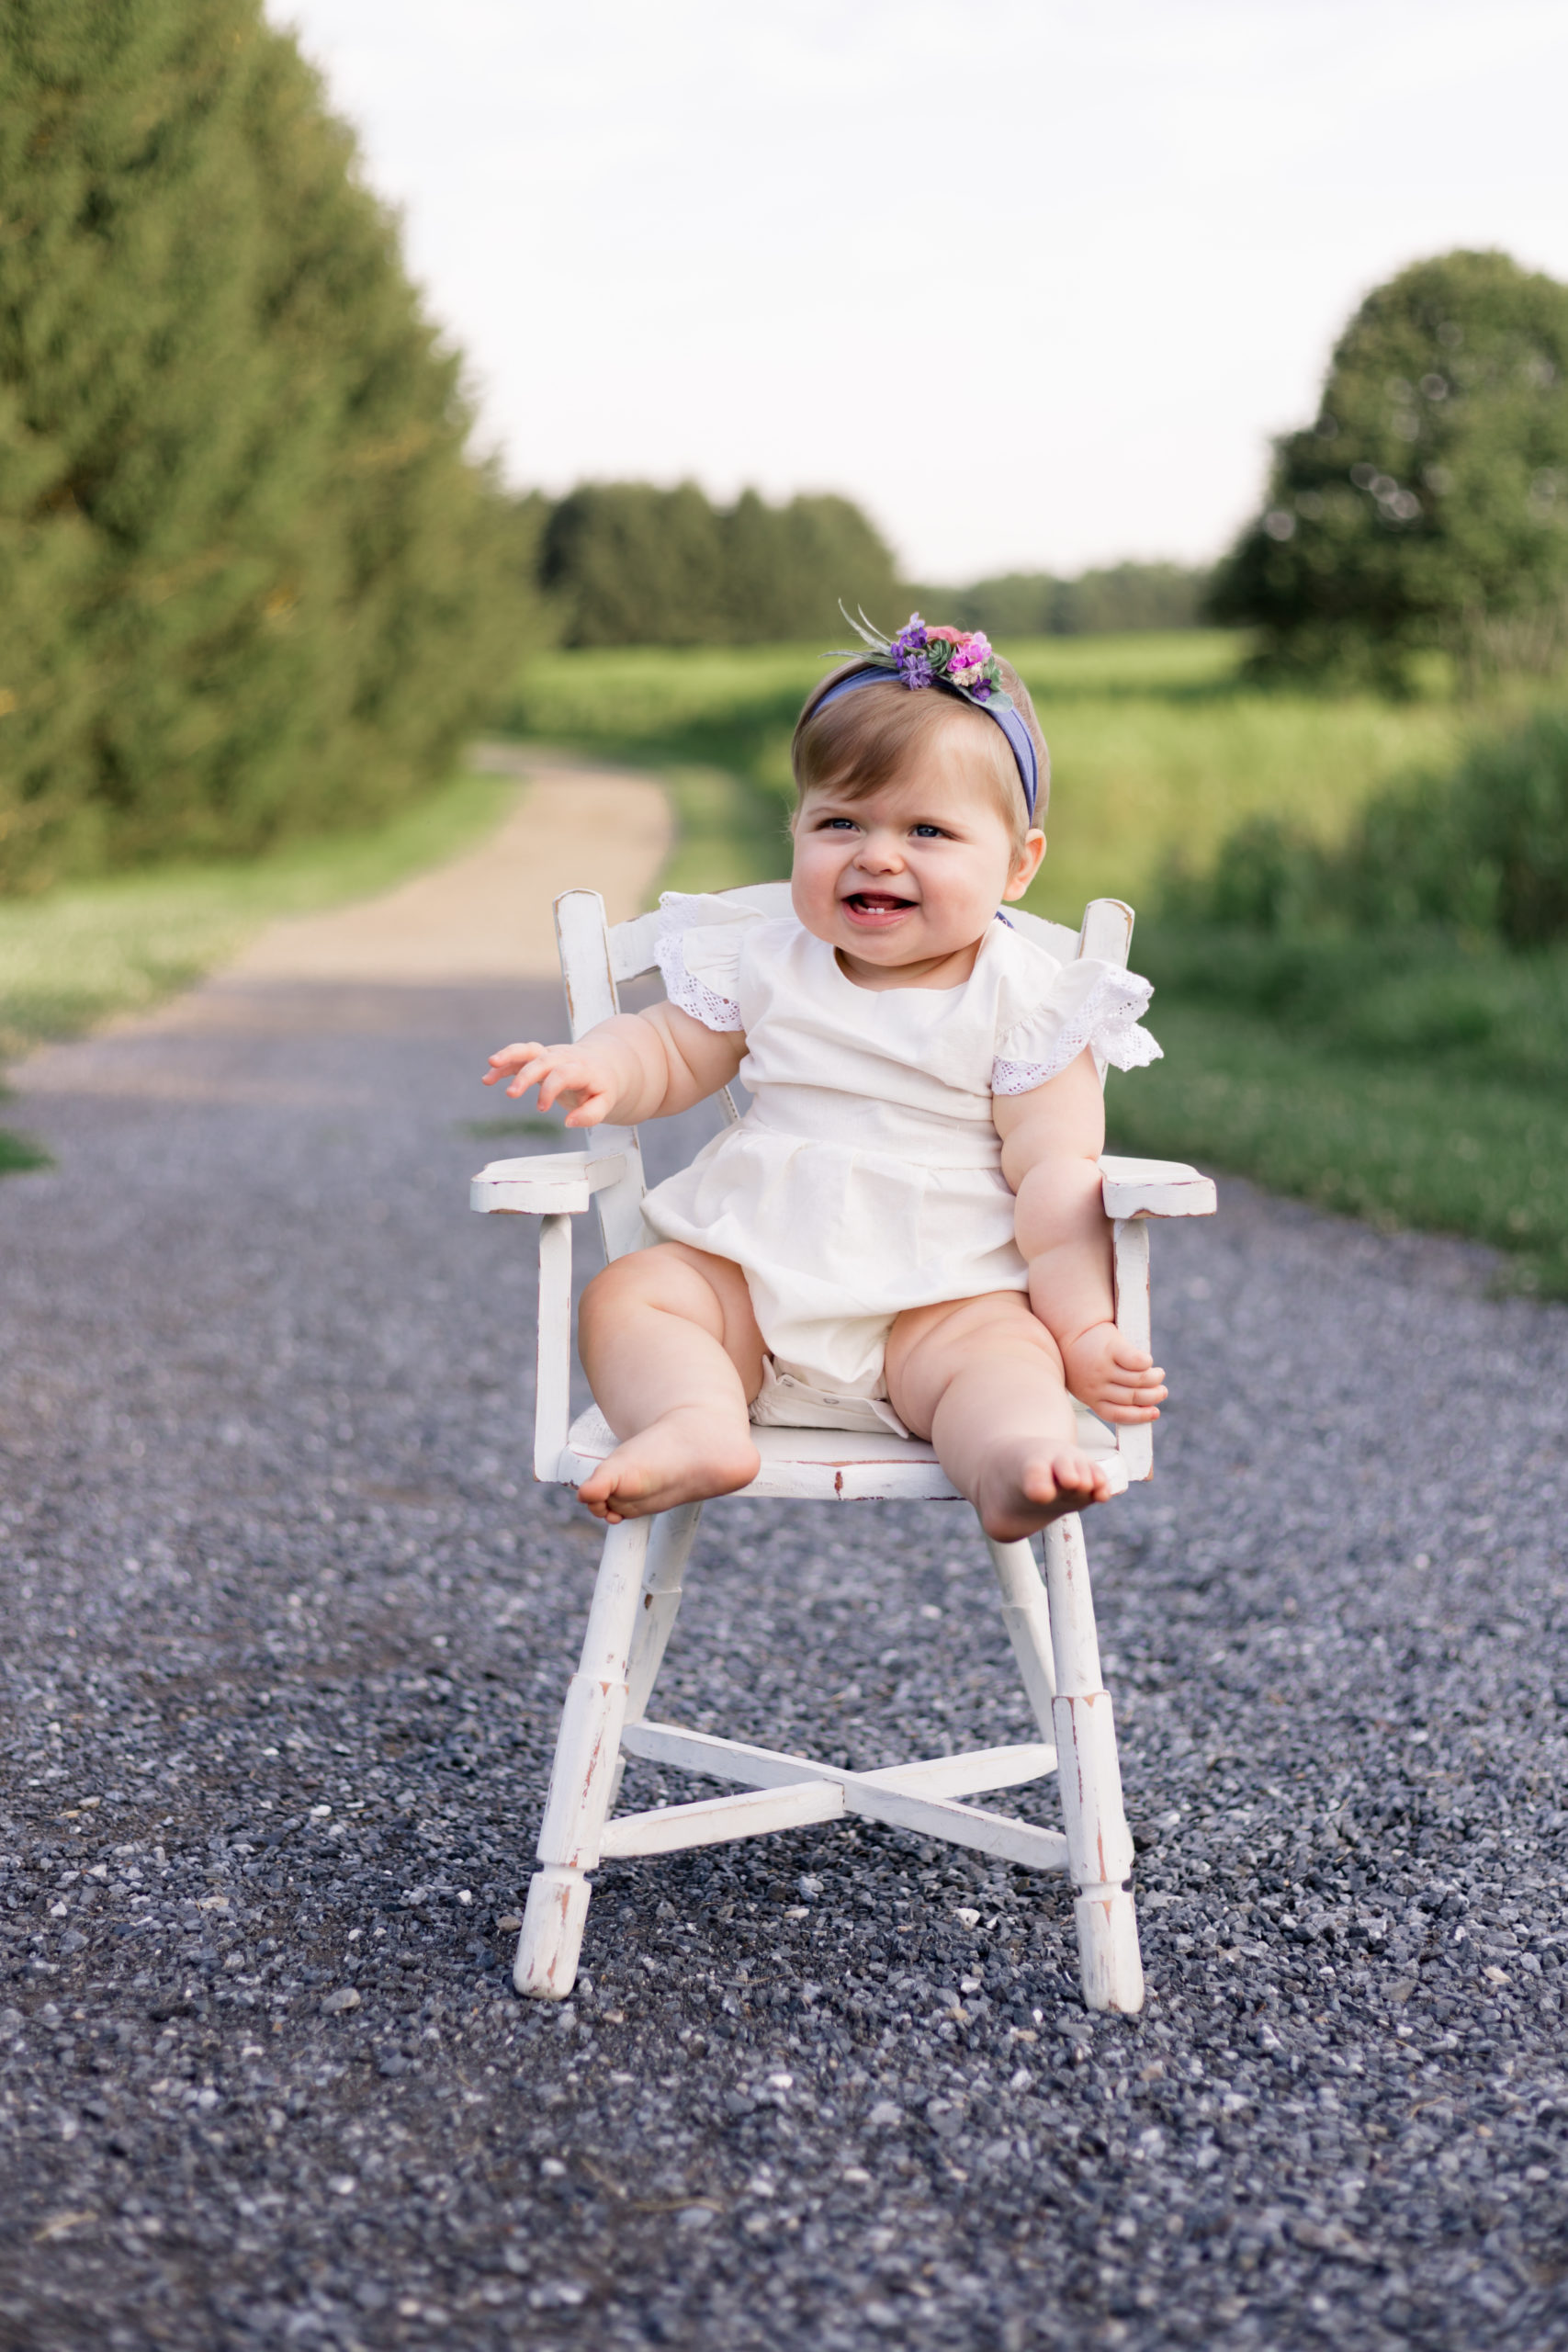 Baby Girl Sitting on a chair